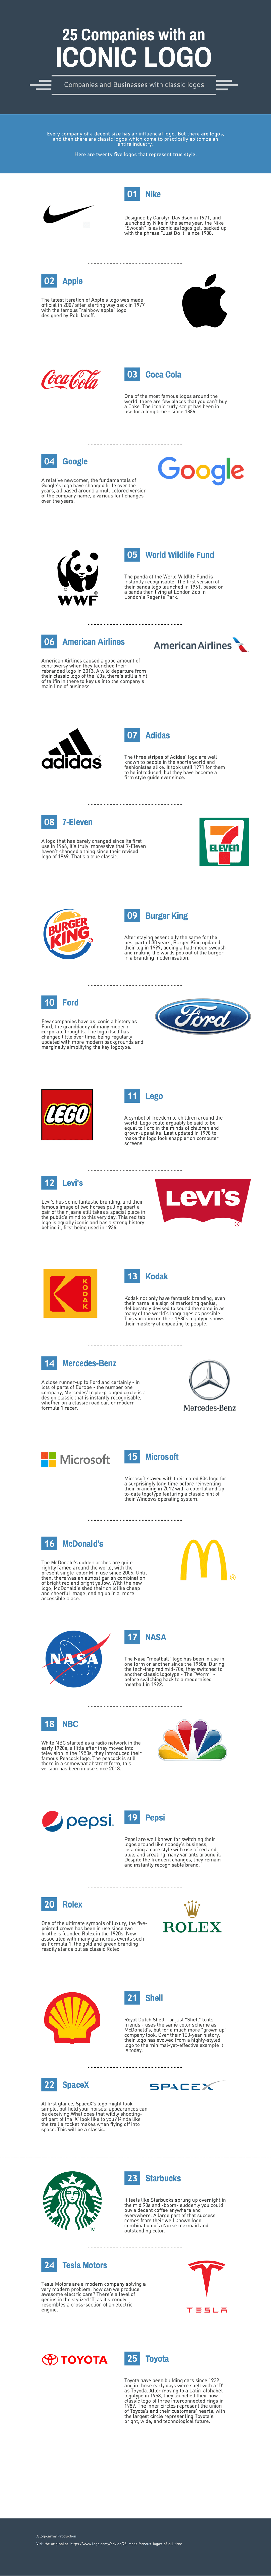 Most Recognizable Company Logo - The 25 Most Famous Logos of All Time | Infographics Race